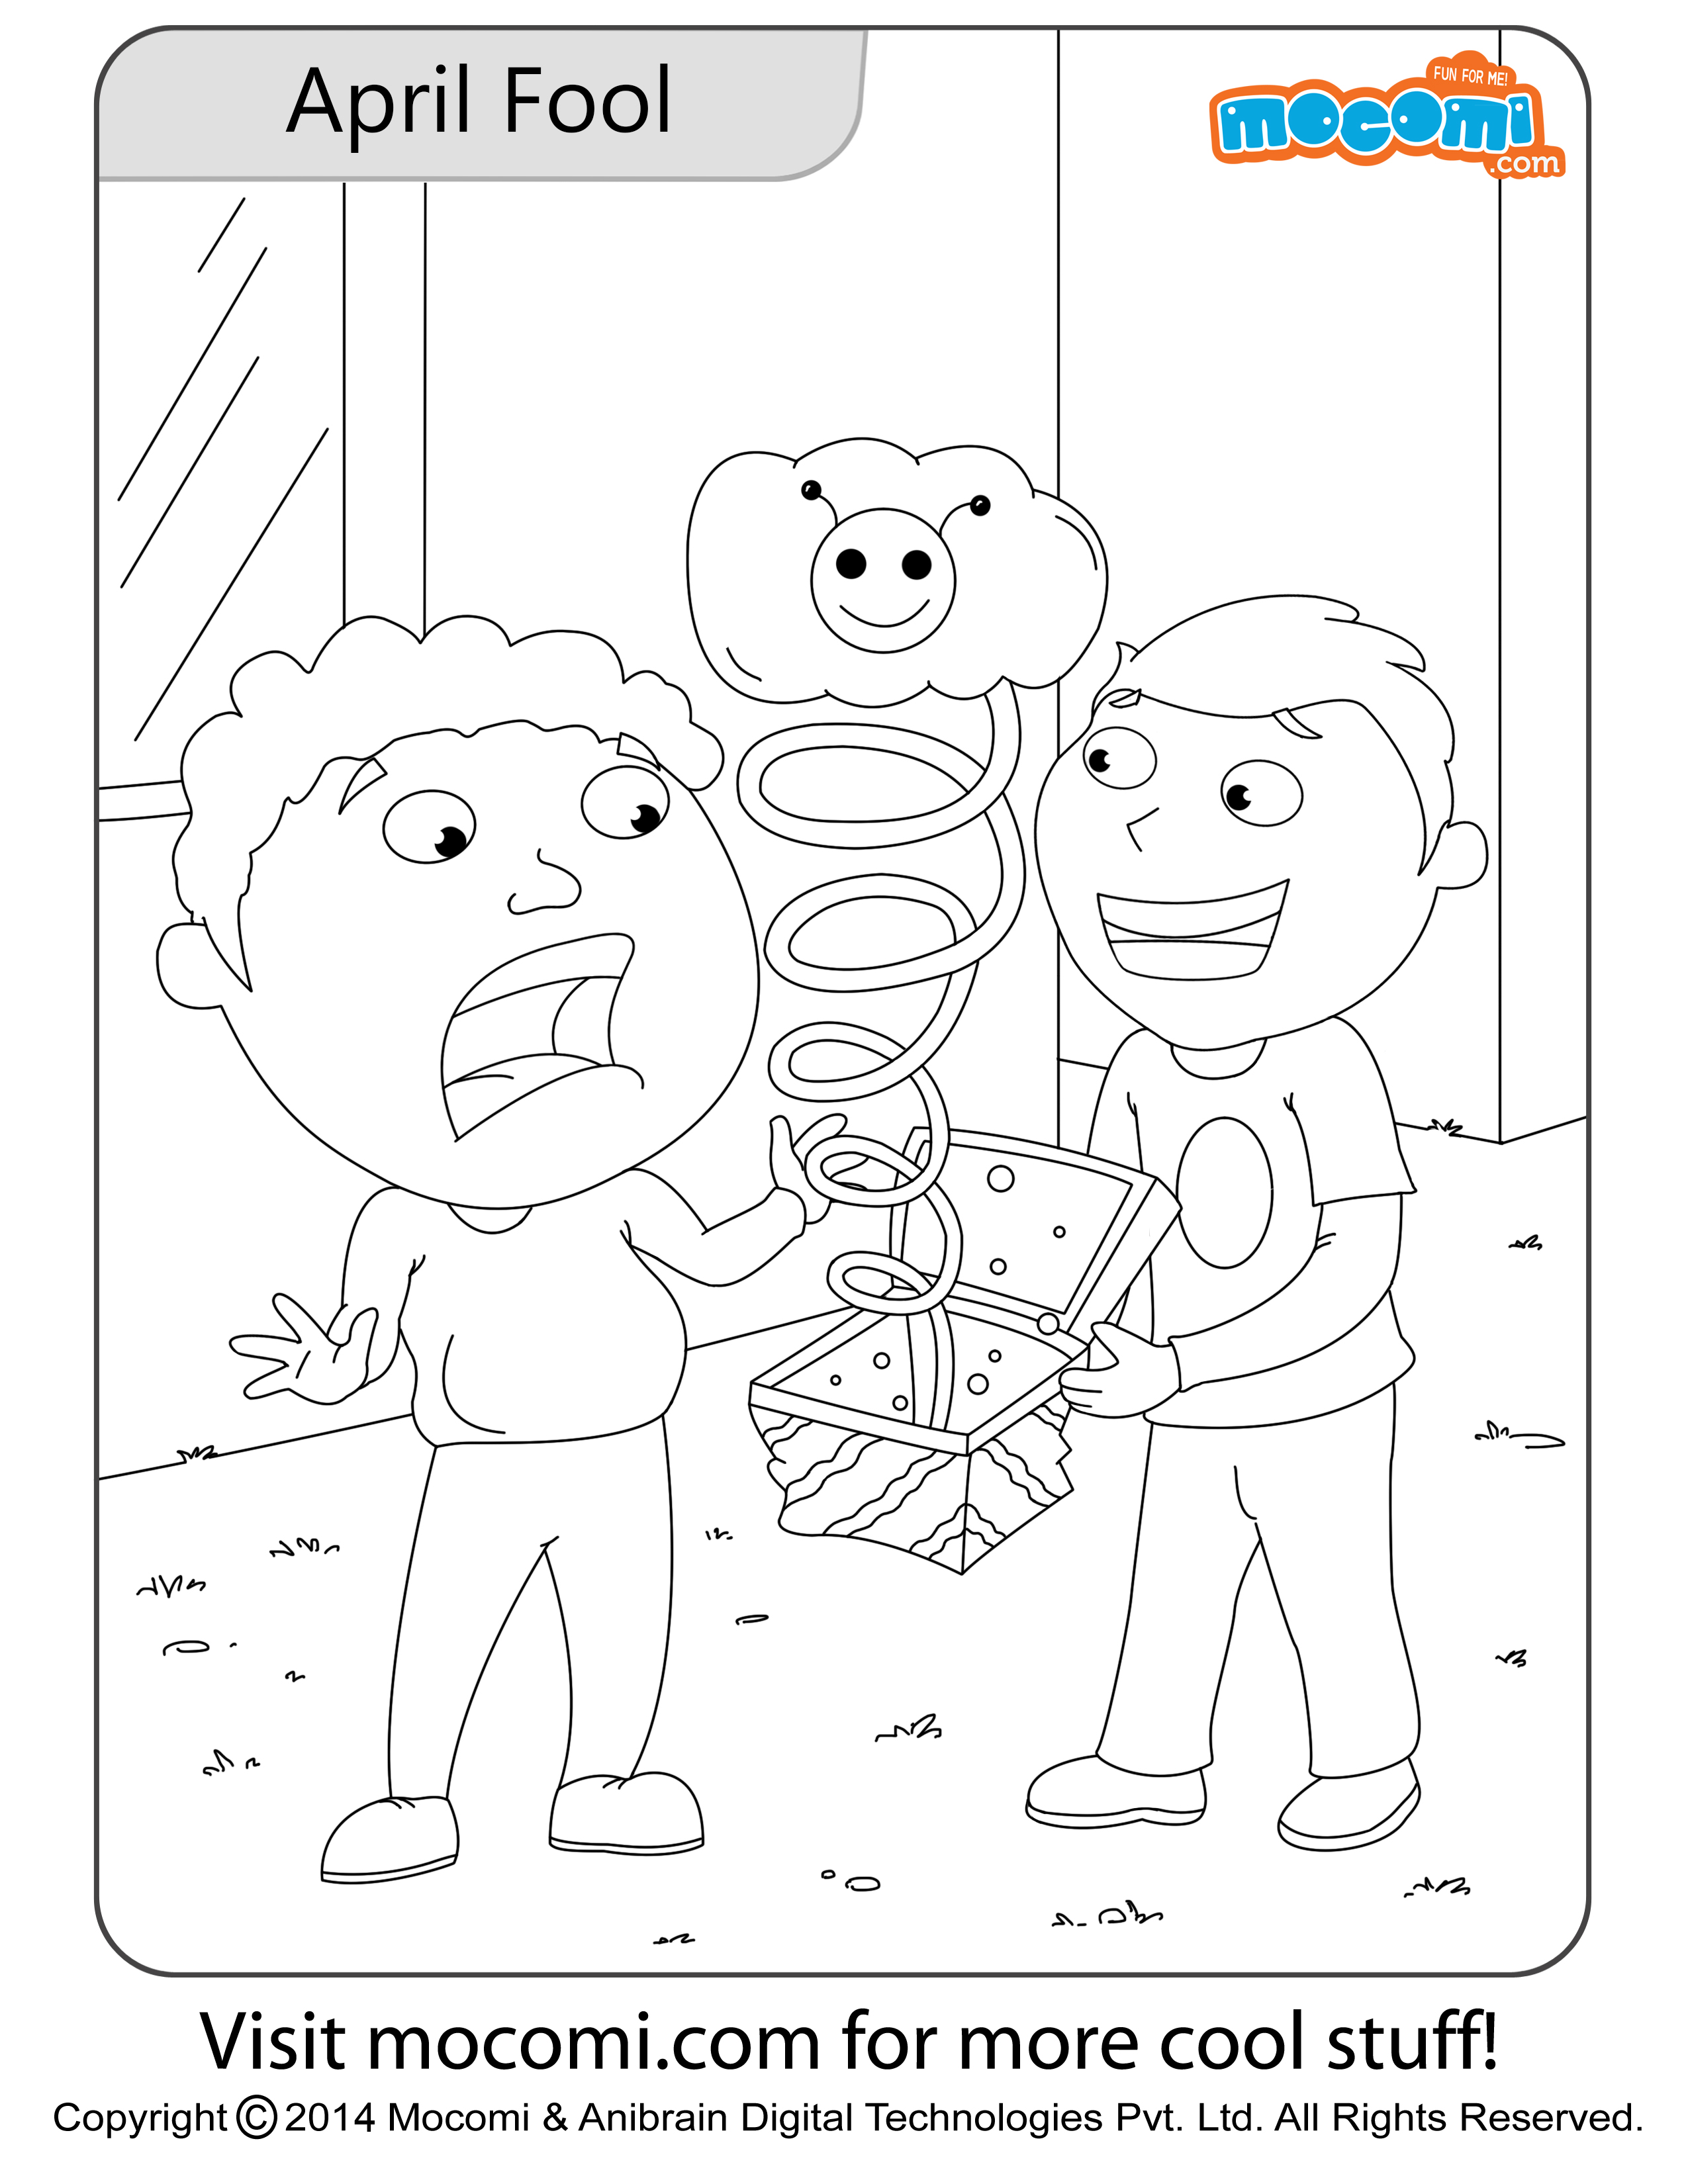 April Fool – Colouring Page